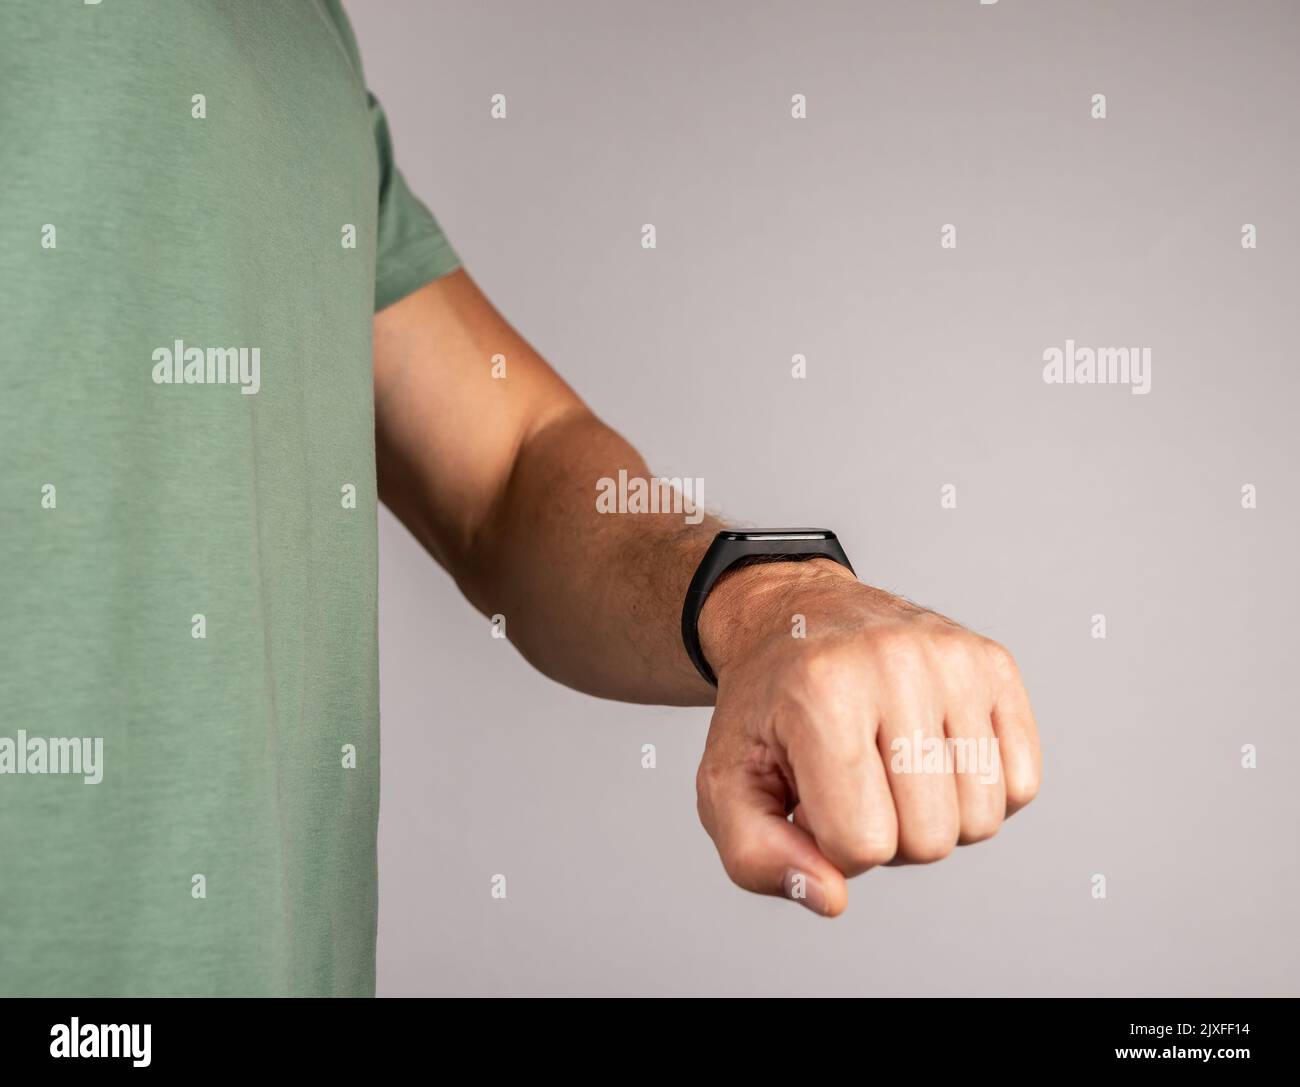 Man looking at fitness bracelet for walking steps, running distance or heart rate monitoring. Physical well-being improvement. Healthy lifestyle conce Stock Photo